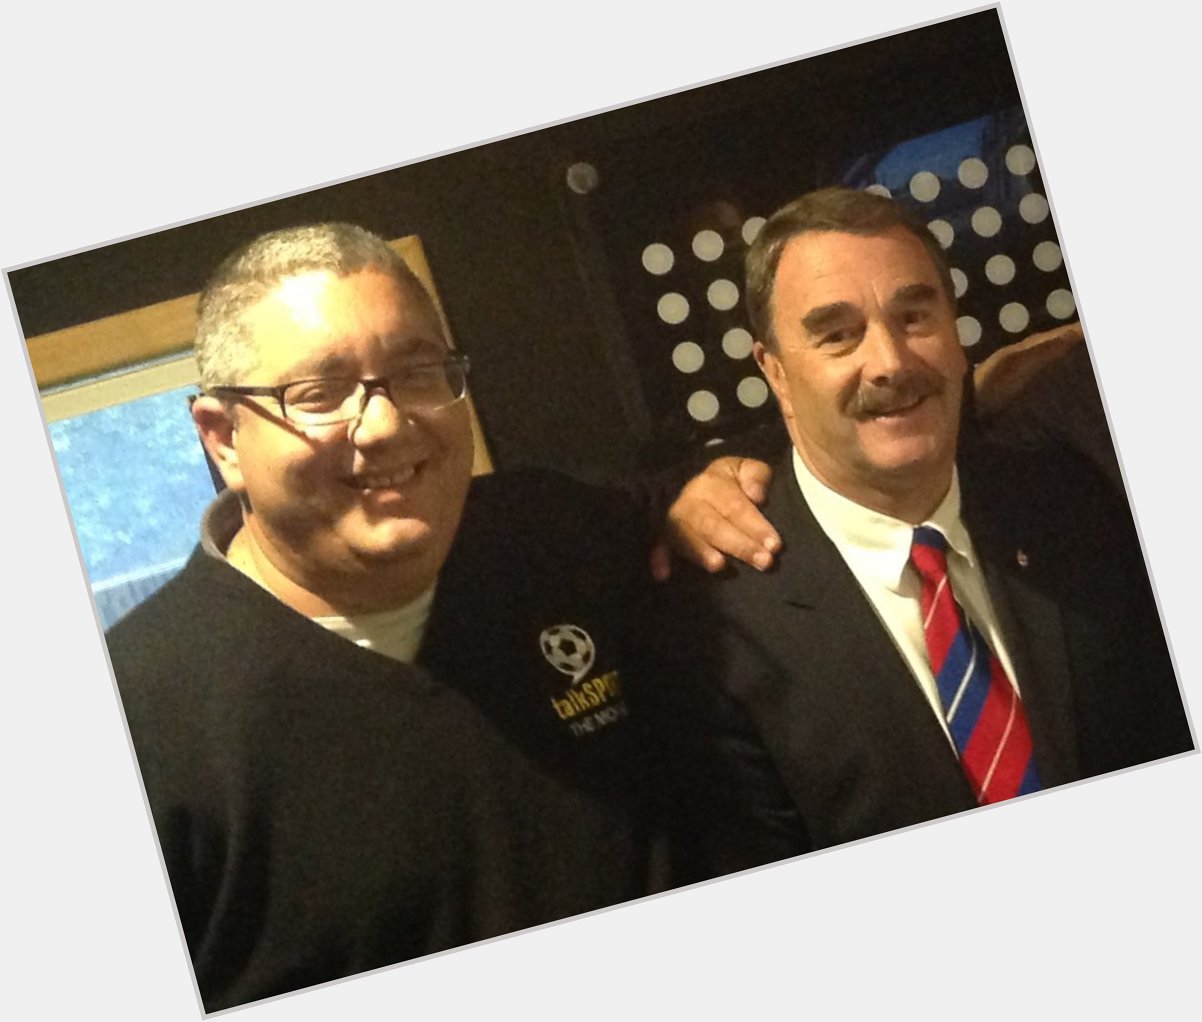 Happy Birthday to former F1 World Champion Nigel Mansell, have a great day my friend 